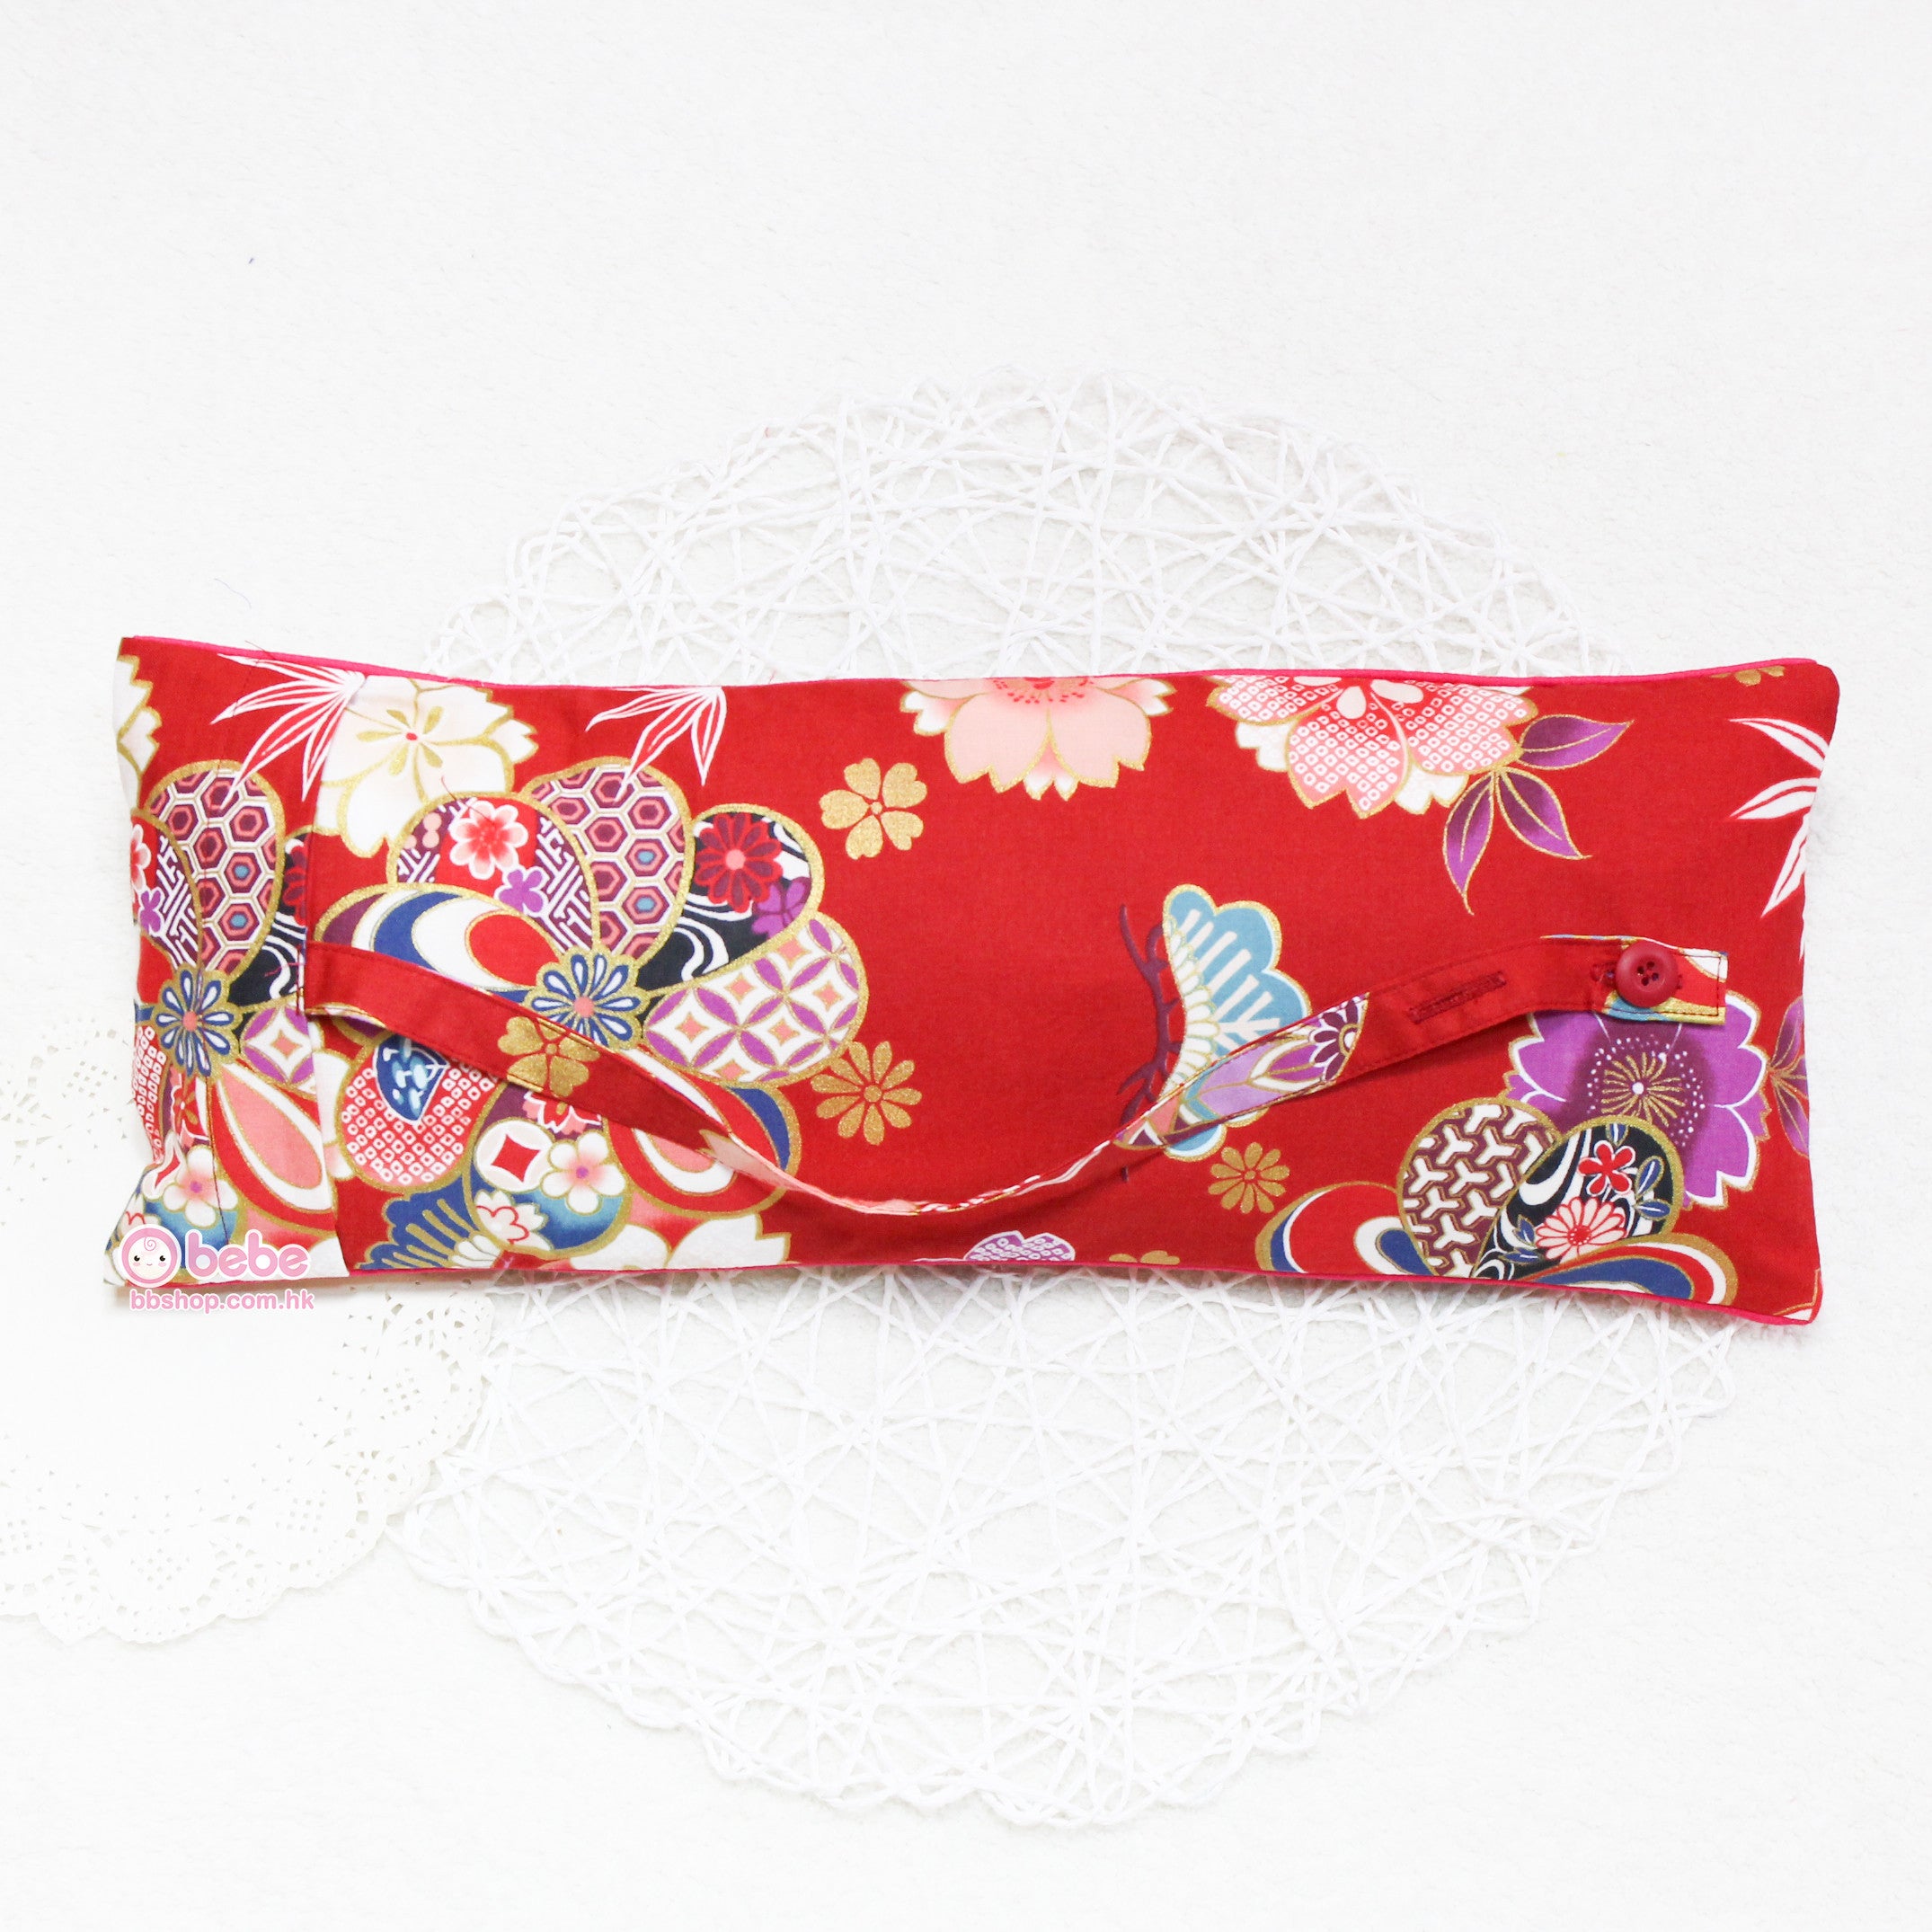 HEB739 紅色燙金繡球繡名安寧米袋 Red Gilded Japanese Fabric Personalized Rice Bag